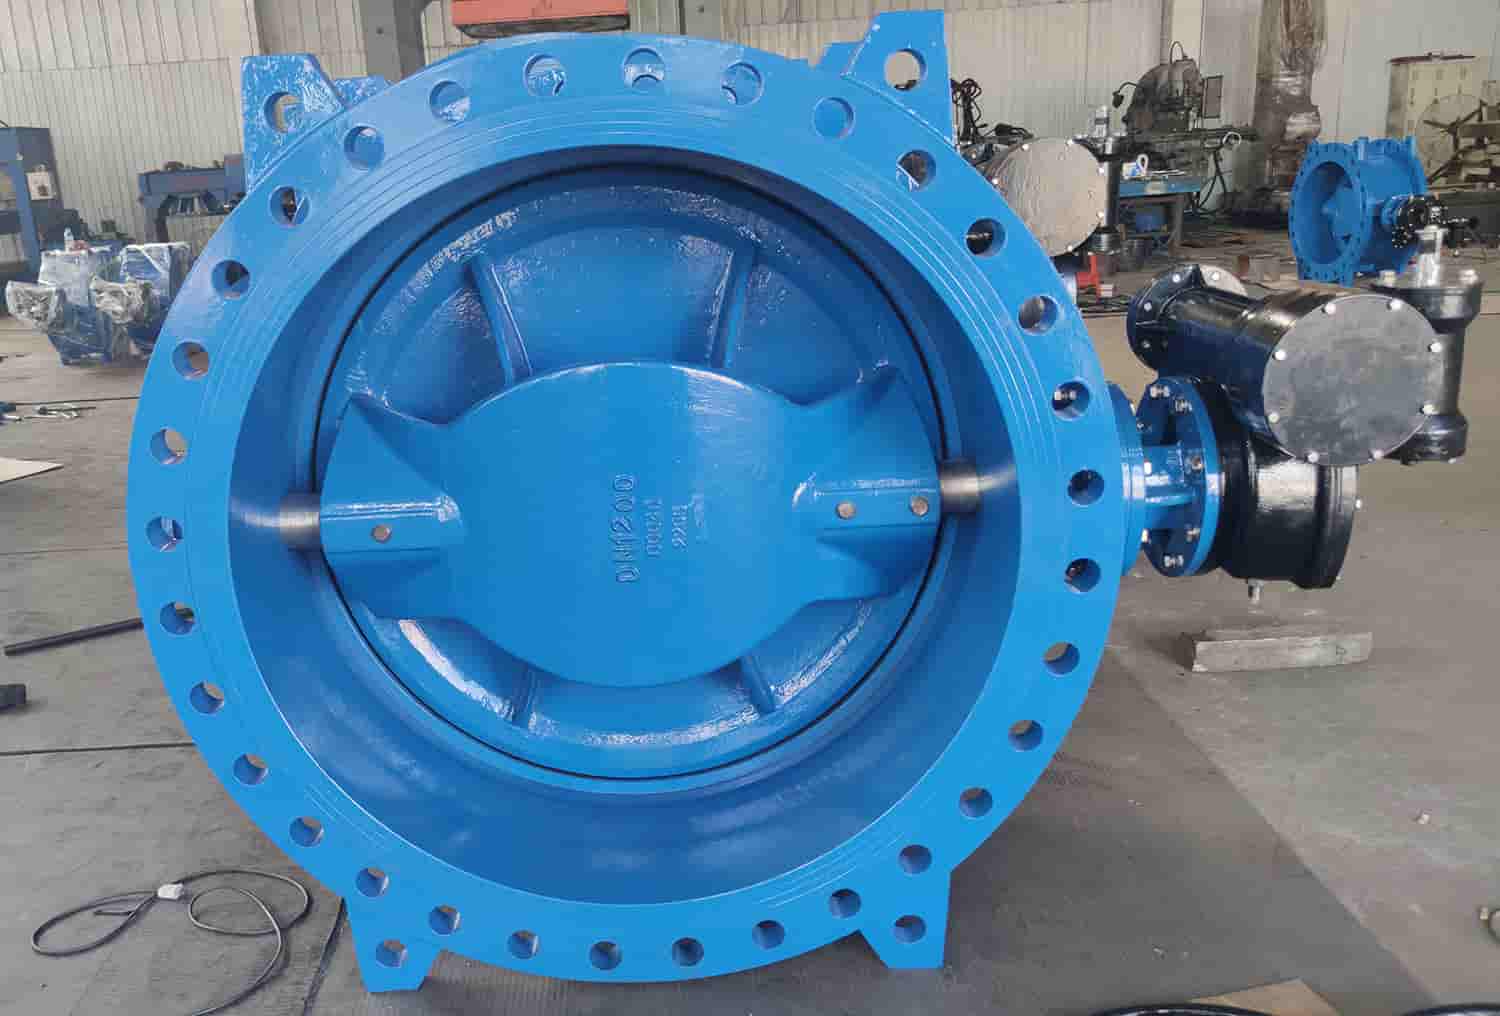 Water plant, power plant, steel mill smelting, chemical industry, water source spring project, environmental facilities construction Double eccentric butterfly valve_Tianjin Union Valve Co., Ltd.